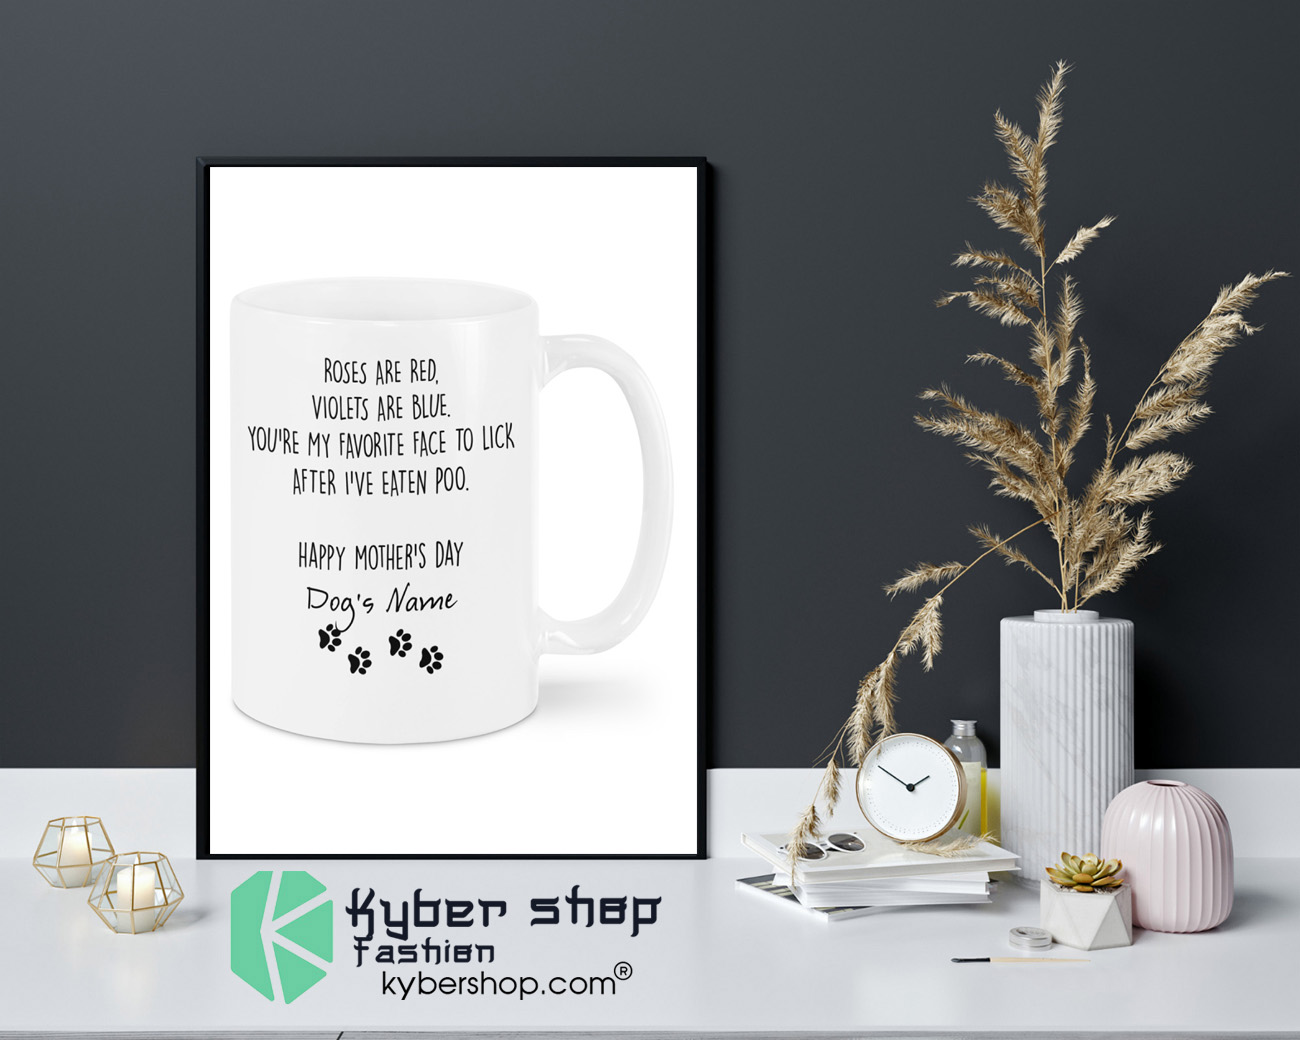 Roses are red violets are blue you're my favorite face to lick Happy mother's day mug 4